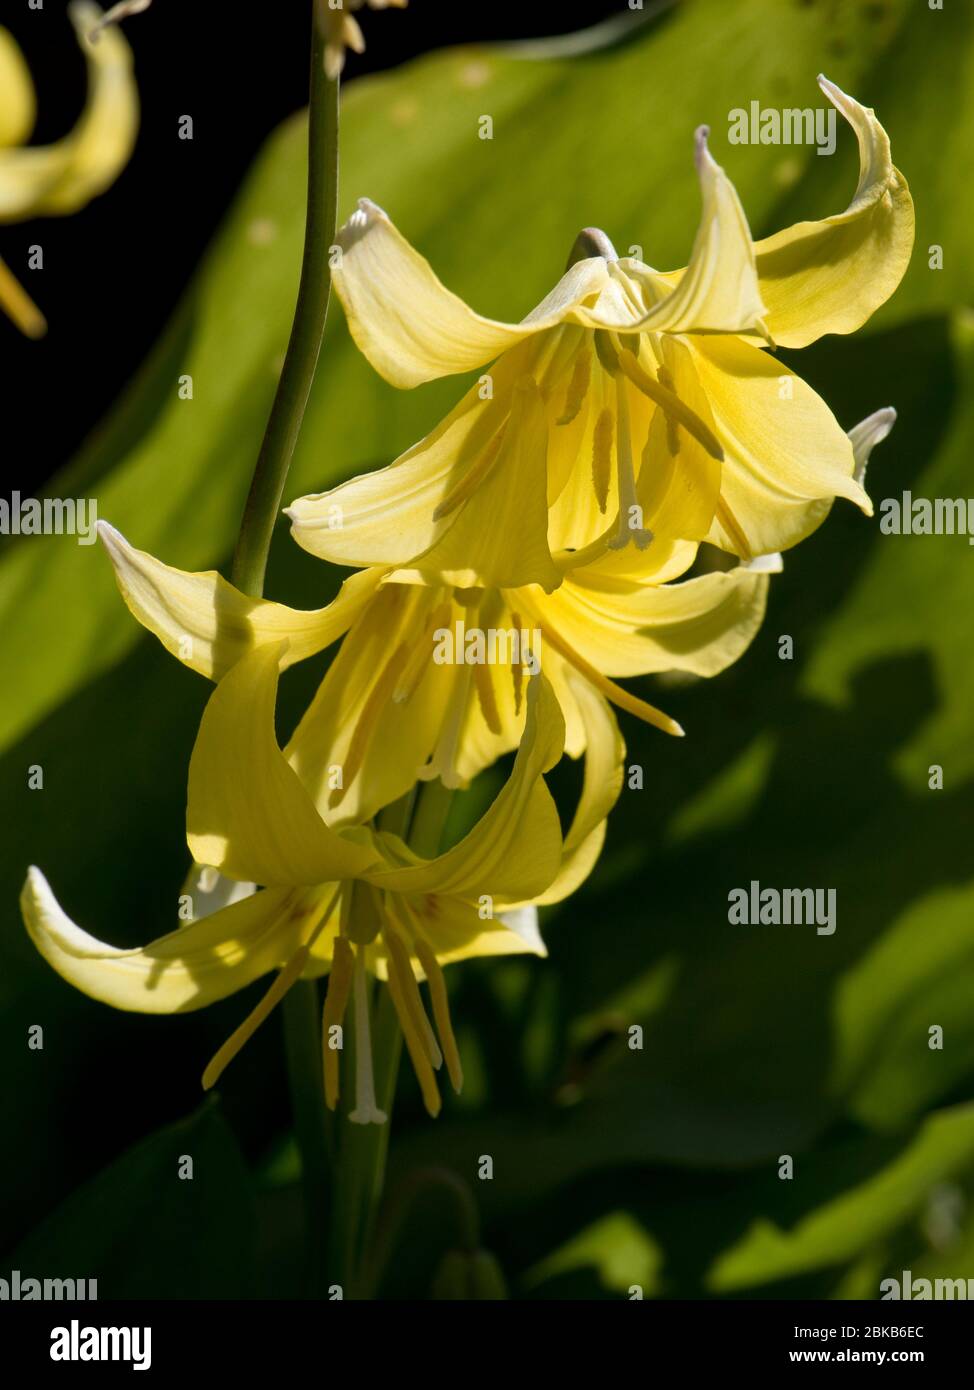 Dog's-tooth violet or fawn lily (Erythronium 'Pagoda') pendulous yellow recurved flowers backlit by spring afternoon sunshine, April Stock Photo